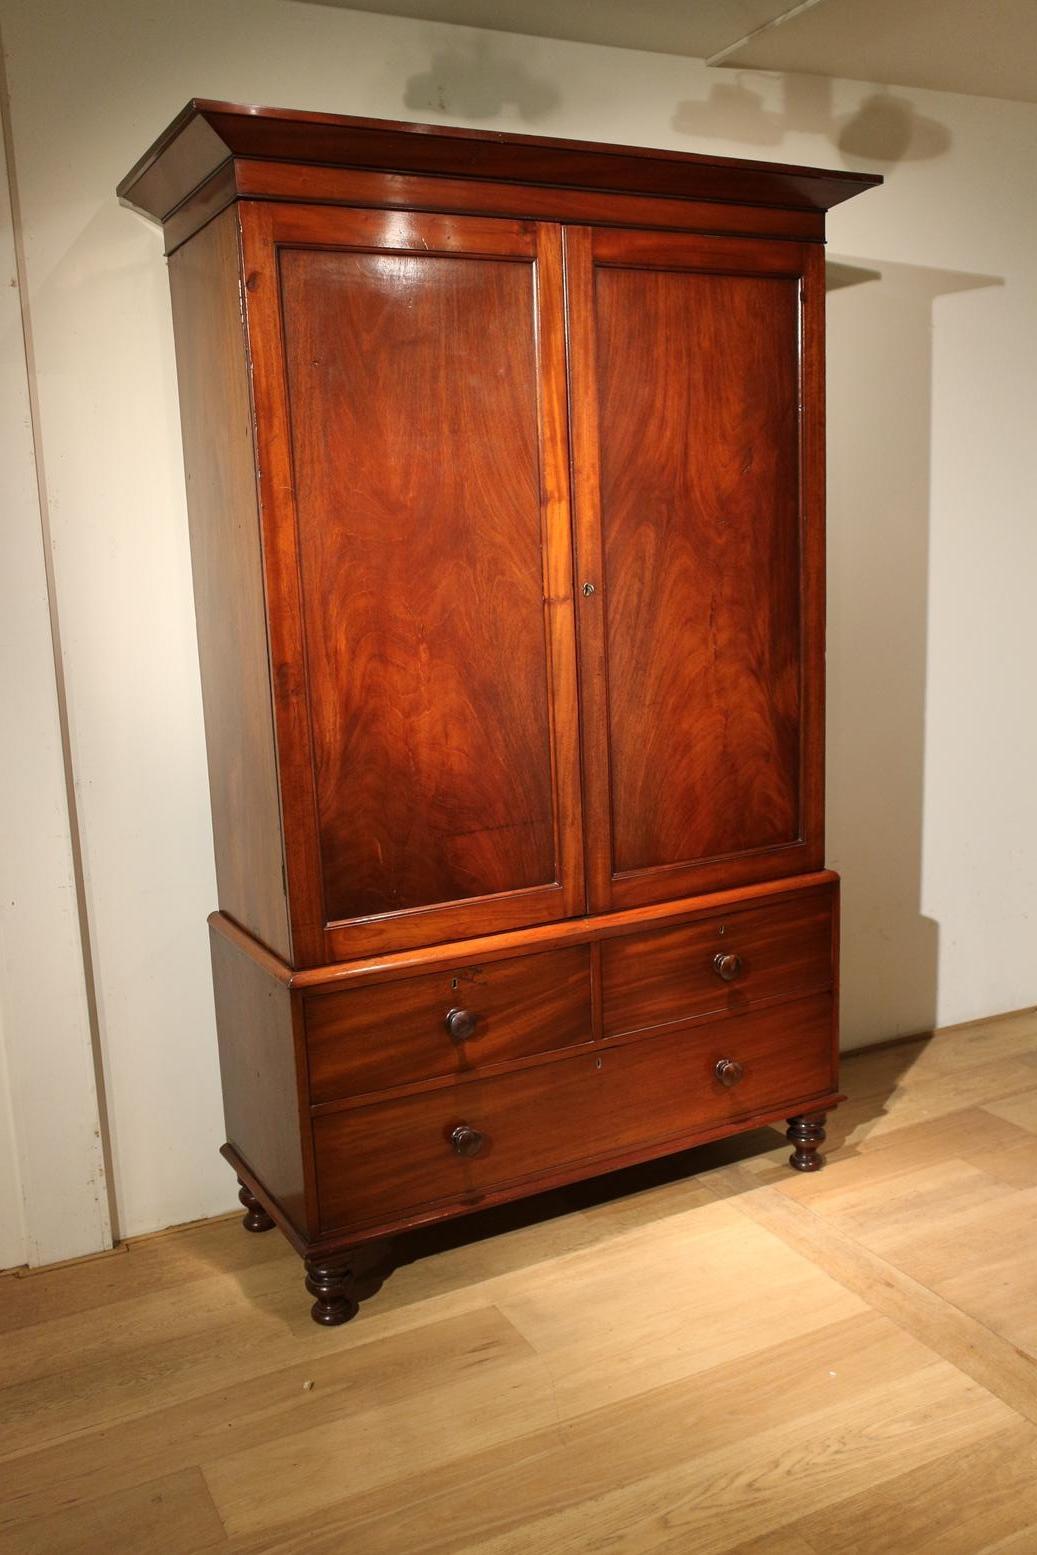 Mahogany cabinet in good condition. Beautiful warm color. Ideal as a wardrobe.

Origin: England
Period: Approx. 1830
Size: 122cm x 49cm x h.213cm.